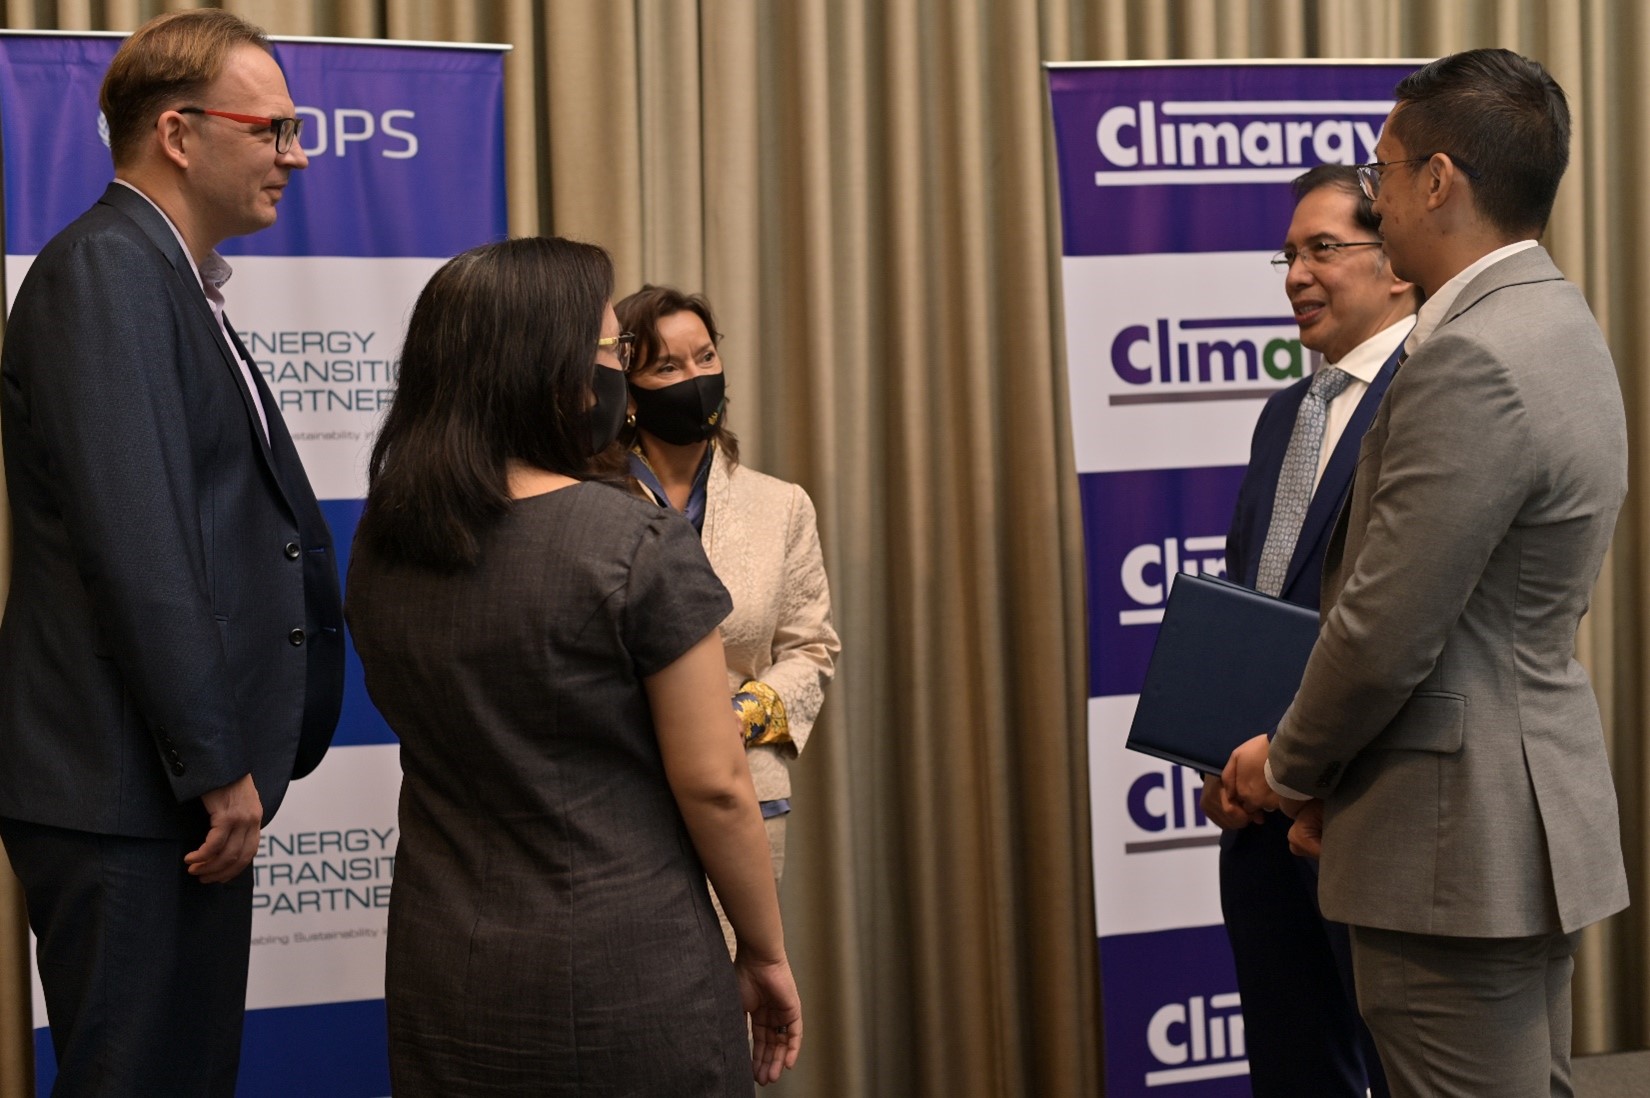 Climargy enters into partnership with UN agency